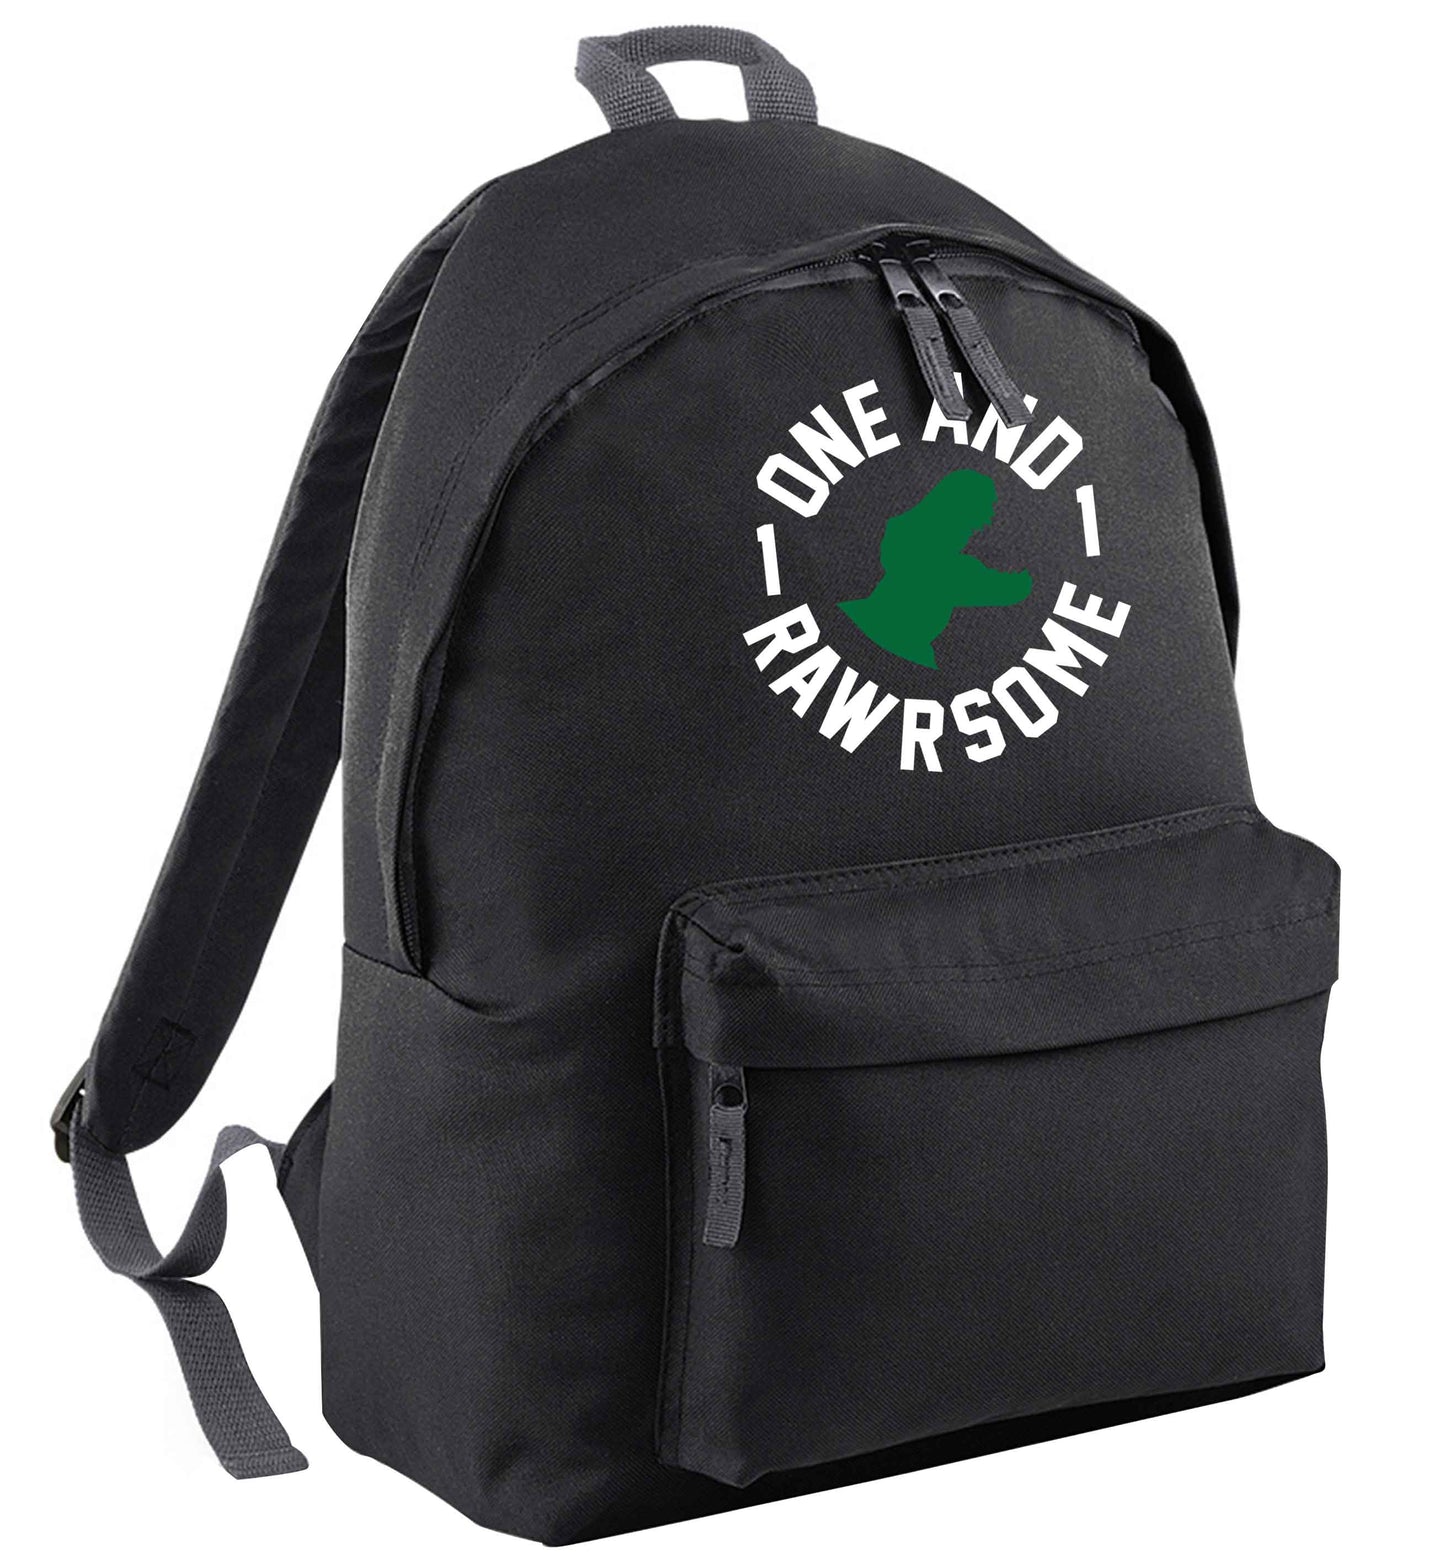 One and Rawrsome | Children's backpack